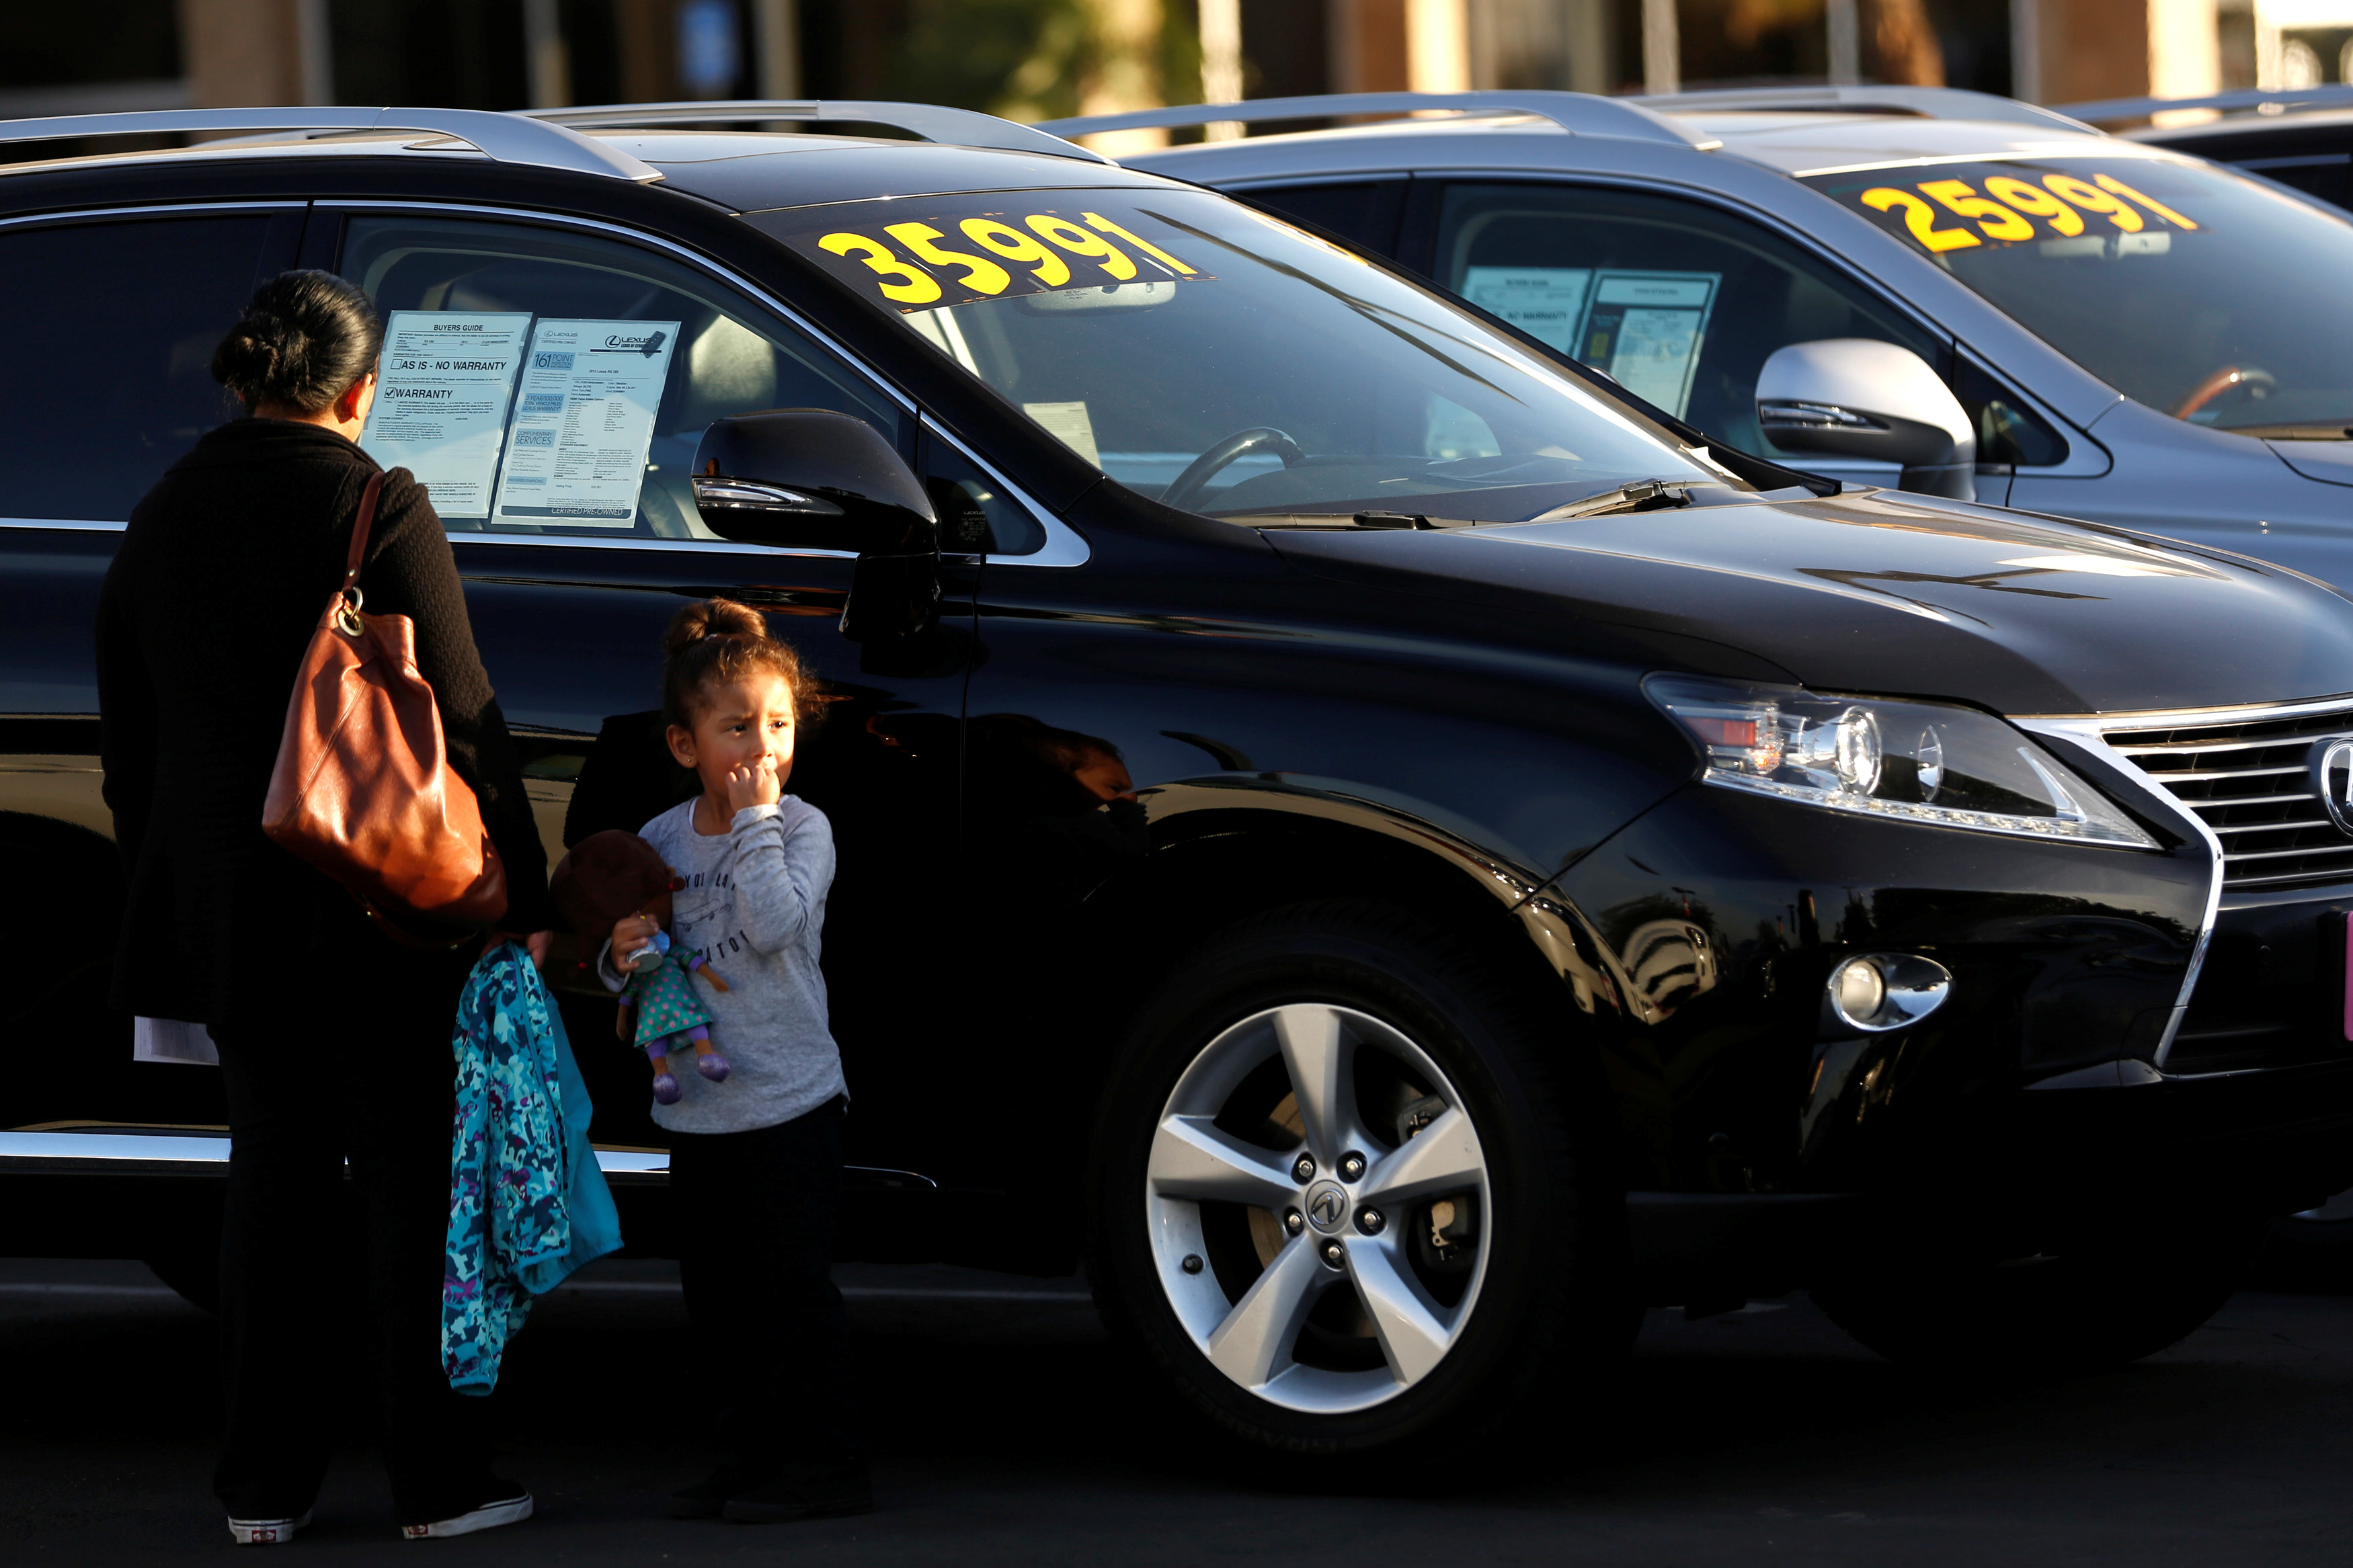 People look at vehicles for sale on the lot at AutoNation Toyota dealership in Cerritos